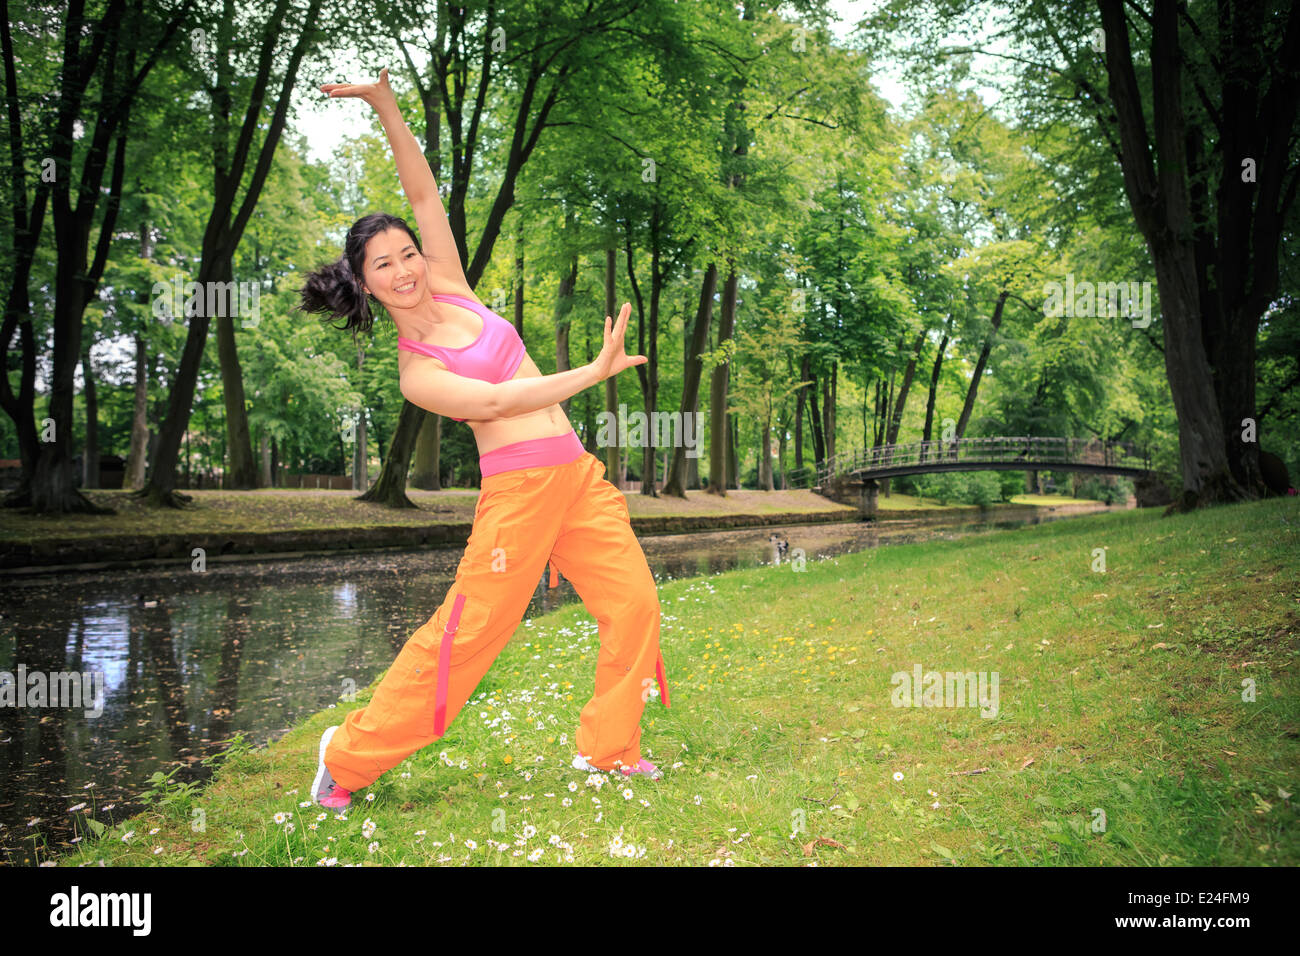 woman dancing zumba or aerobics in an old park Stock Photo